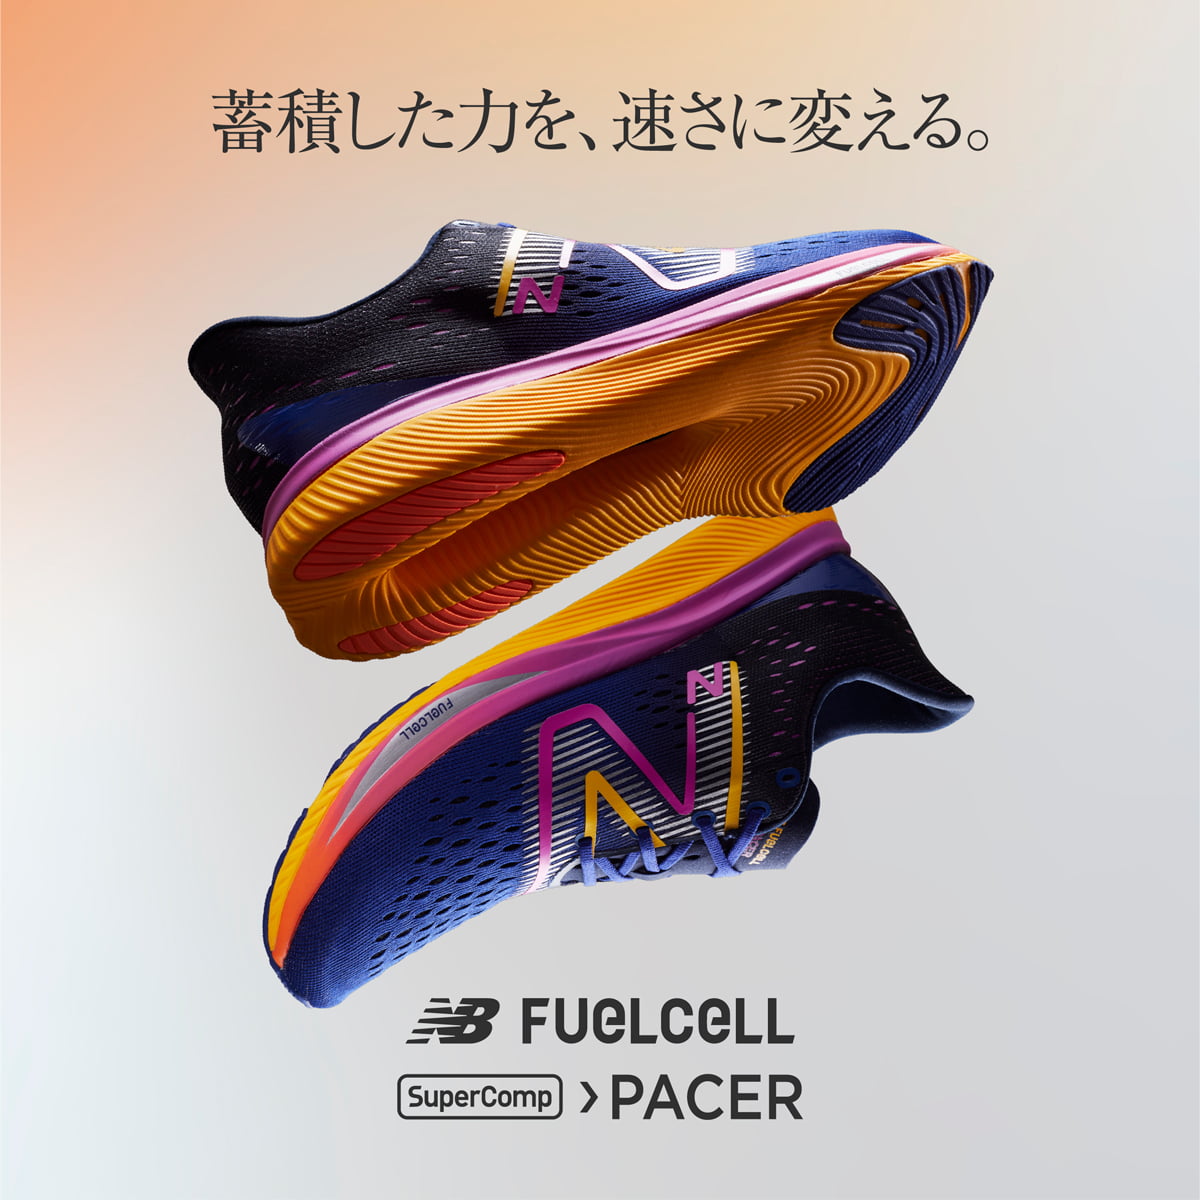 FuelCell SuperComp PACER ͂𑬂ɕςVeNmW[EENERGY ARC𓋍ځBXs[hdfwFuelCell SuperComp PACERxB